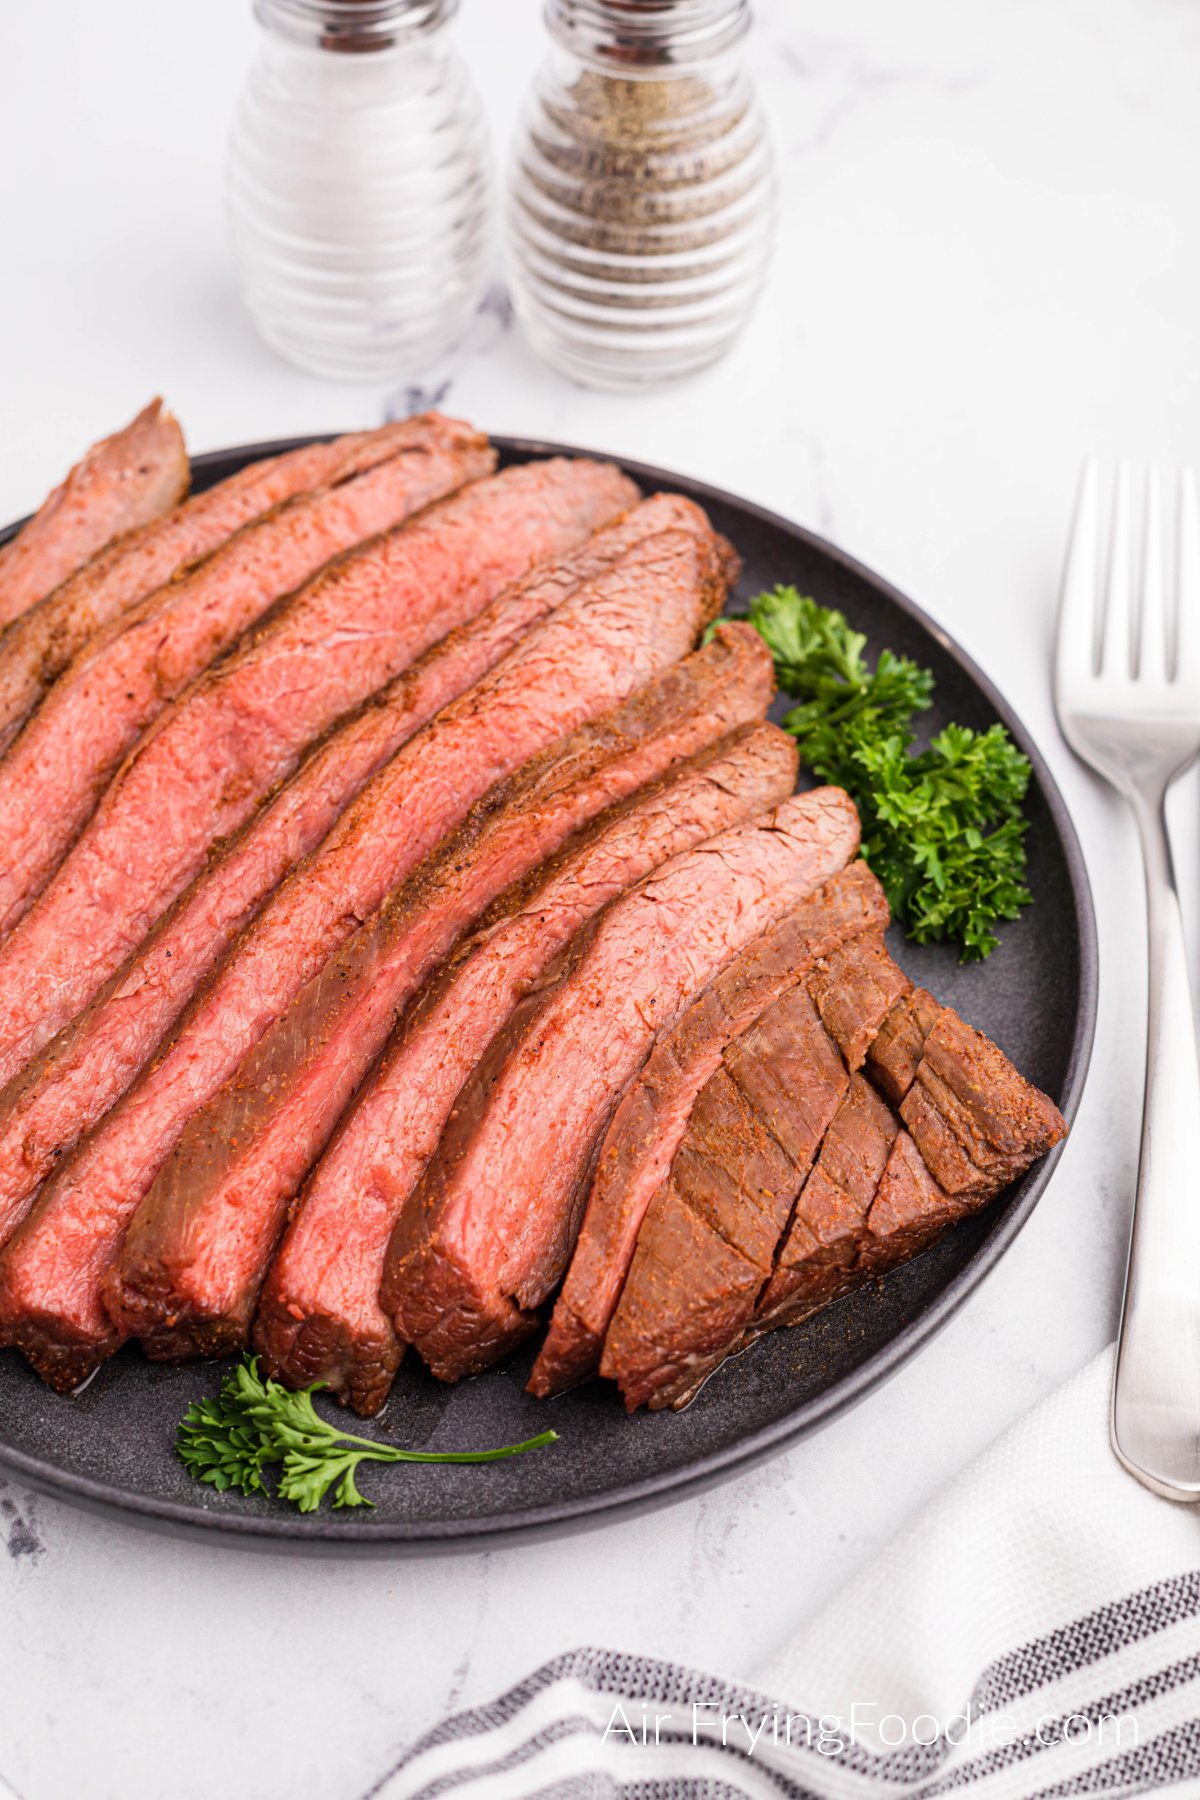 Flank steak served on a platter and ready to serve.